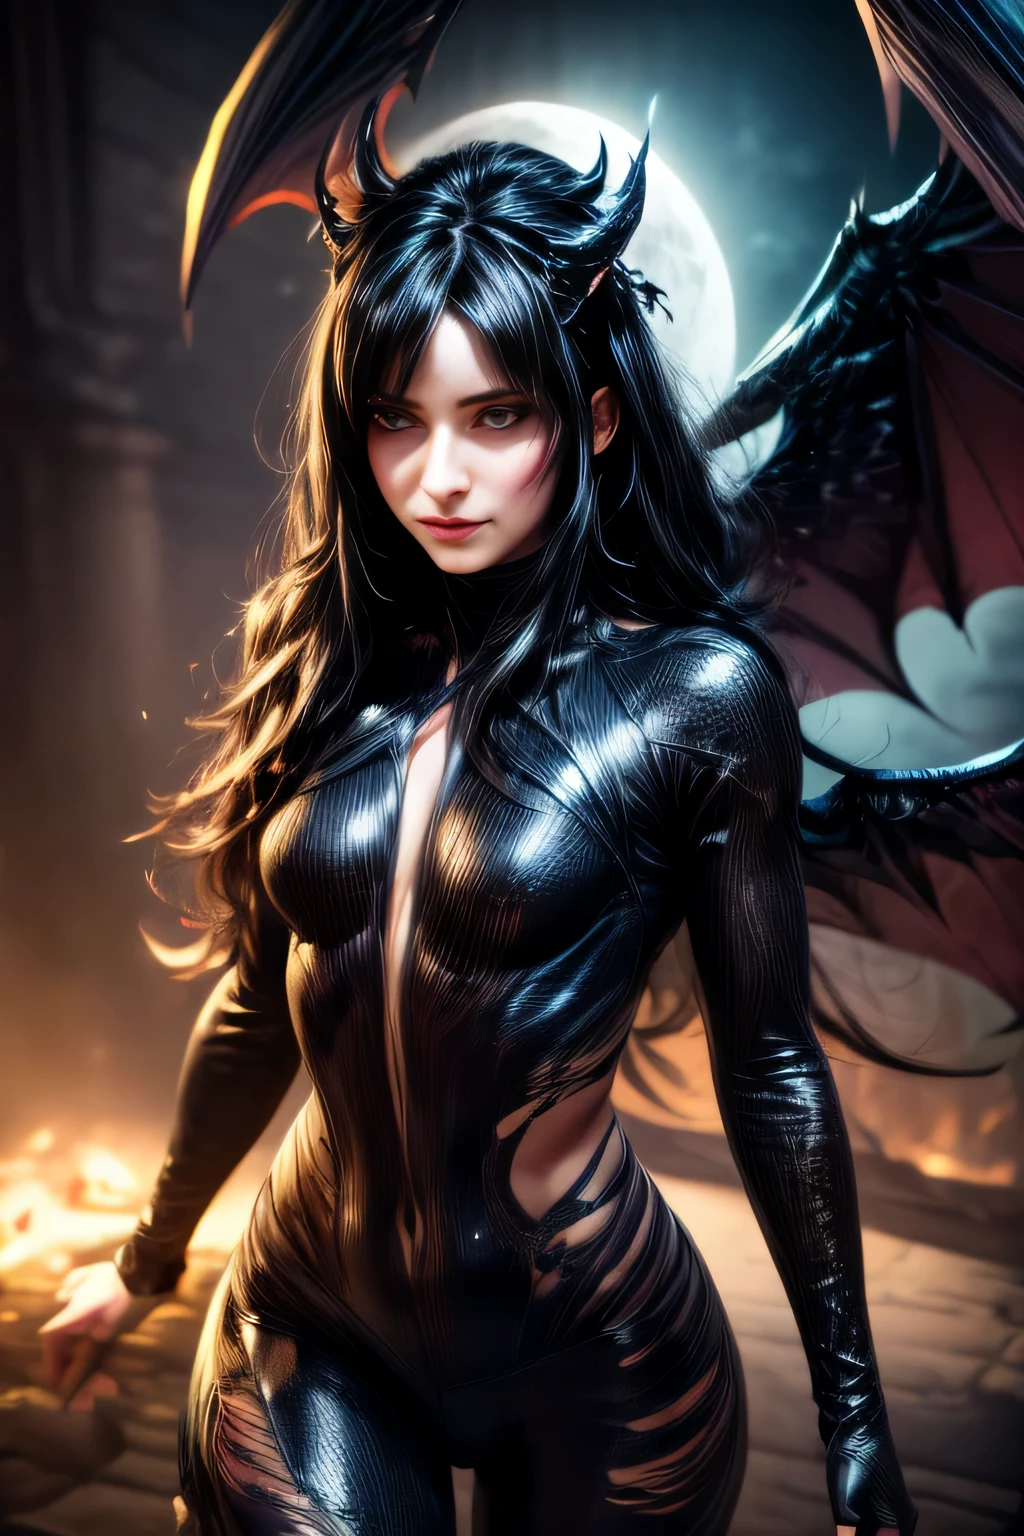 (best quality,4k,8k,highres,masterpiece:1.2),ultra-detailed,(realistic,photorealistic,photo-realistic:1.37), (girl like a succubus with small wings out of hell), full body, intense expression, demon small Wings, flowing long and thick hair, athletic physique, dark clothes, dramatic lighting, high contrast, powerful dynamic lines, vibrant colors, fierce eyes, sharp fangs, ethereal atmosphere, intense energy, flying objects, shattered debris, swirling smoke, epic background, moonlit night, mysterious shadows
,demonictech,better_hands,hands